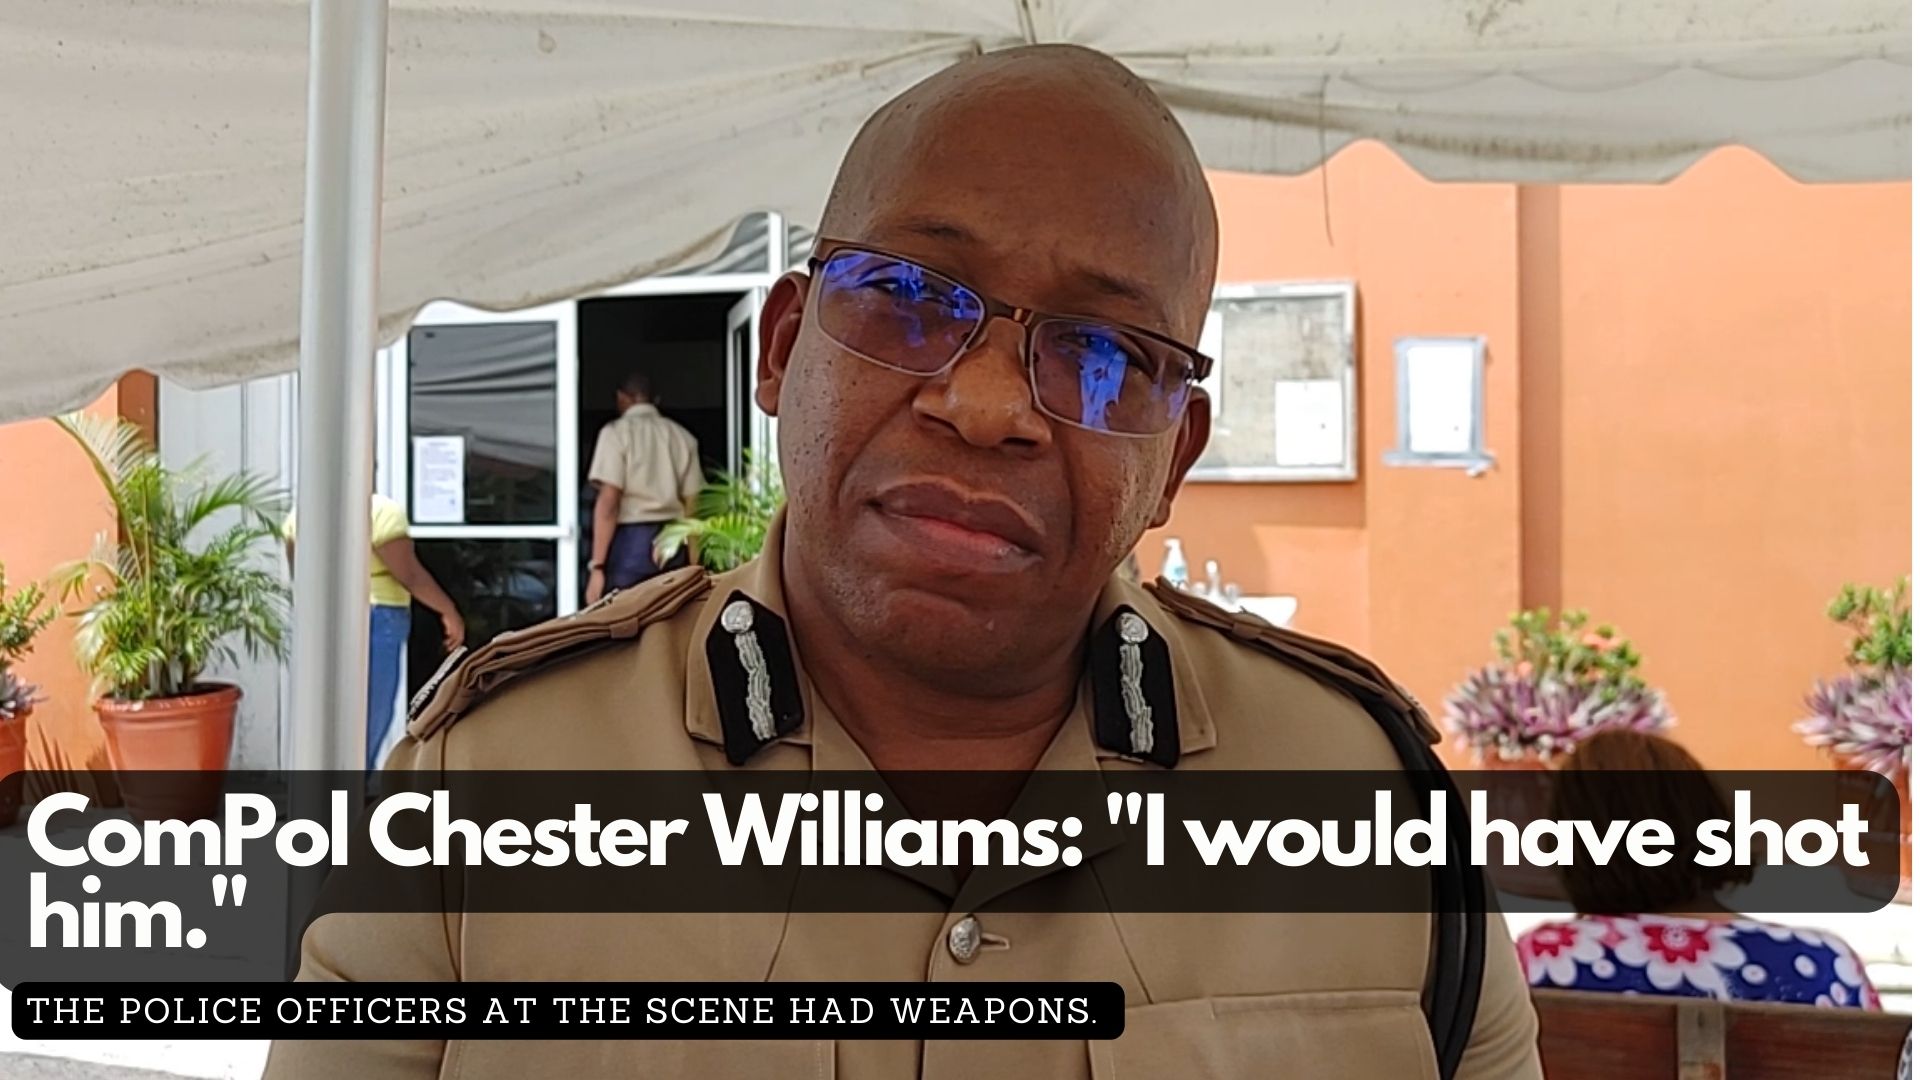 ComPol Chester Williams: "I would have shot him." 